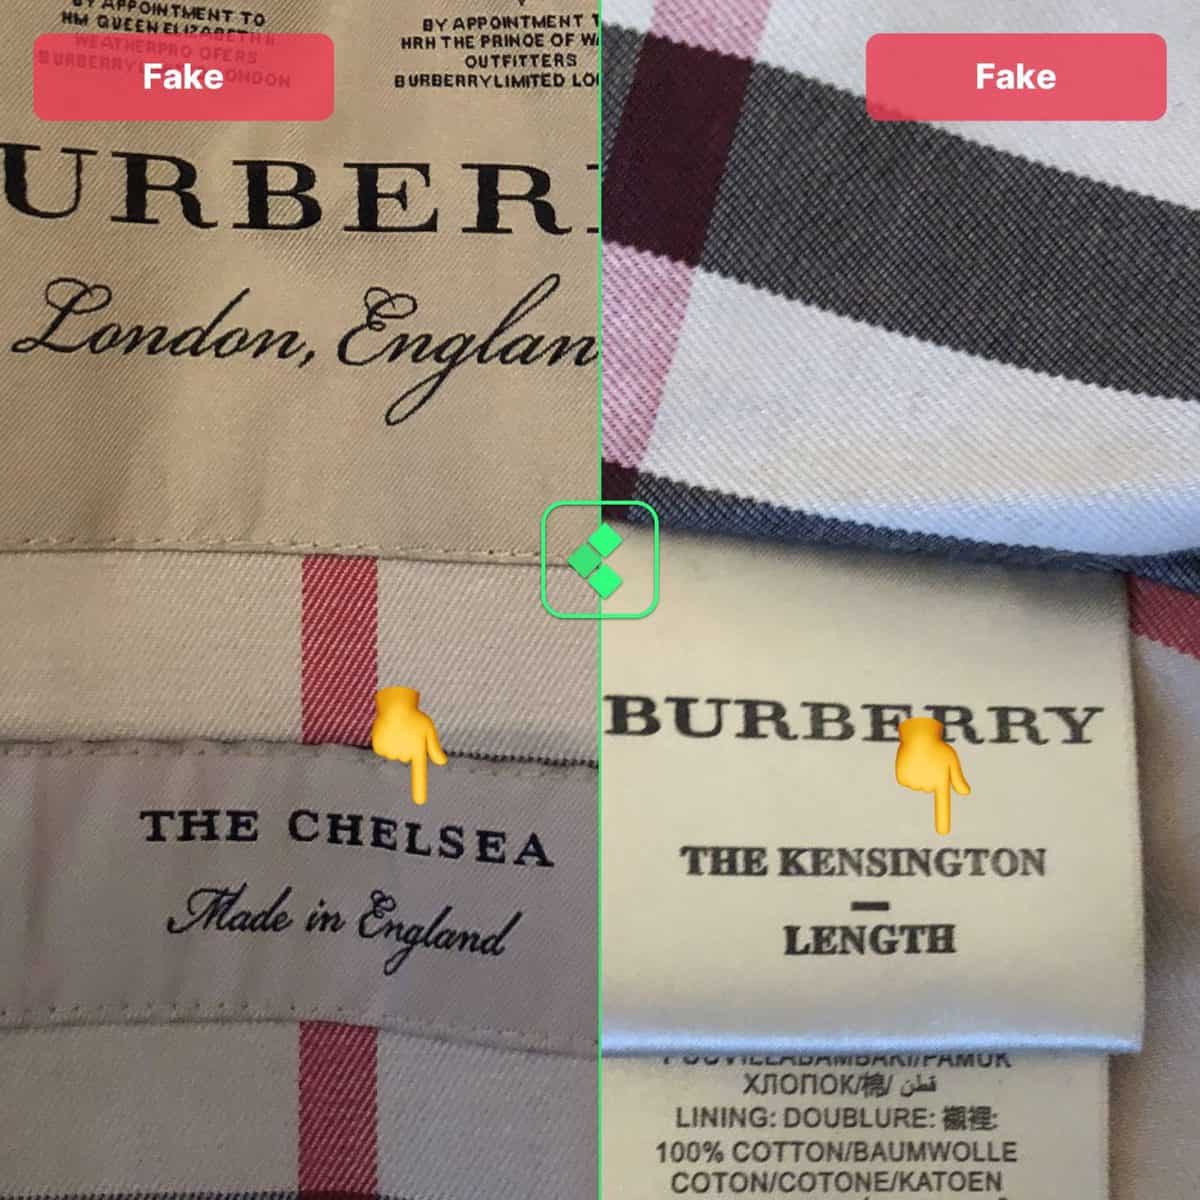 How To Spot Fake Burberry Coats In 2021 - Fake Vs Real Burberry Trench ...